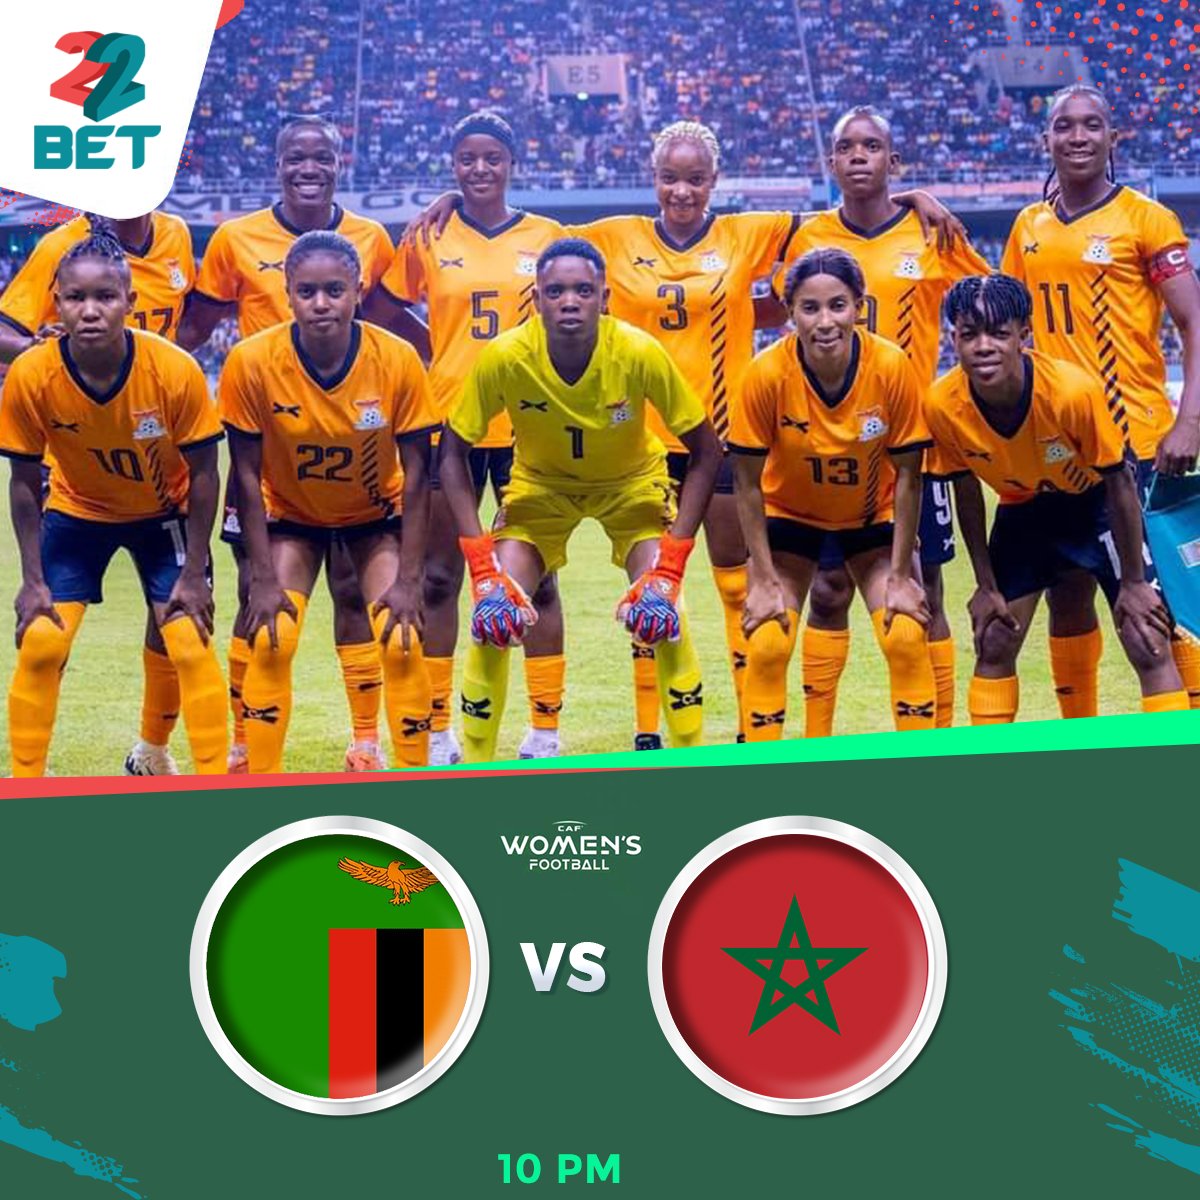 CAF Women's Olympic qualifying Tournament 
Morocco 🇲🇦 vs. Zambia 🇿🇲 

Leg 2 of 2,  A 2-1
⏲️ 10 PM 

90 minutes to turn around for the Copper Queens 
What are your thoughts on the match ahead 🤔 

#ZambiaKuchalo #Copperqueens #22BetZambia #22Bet #Switchto22bet #Bestodds